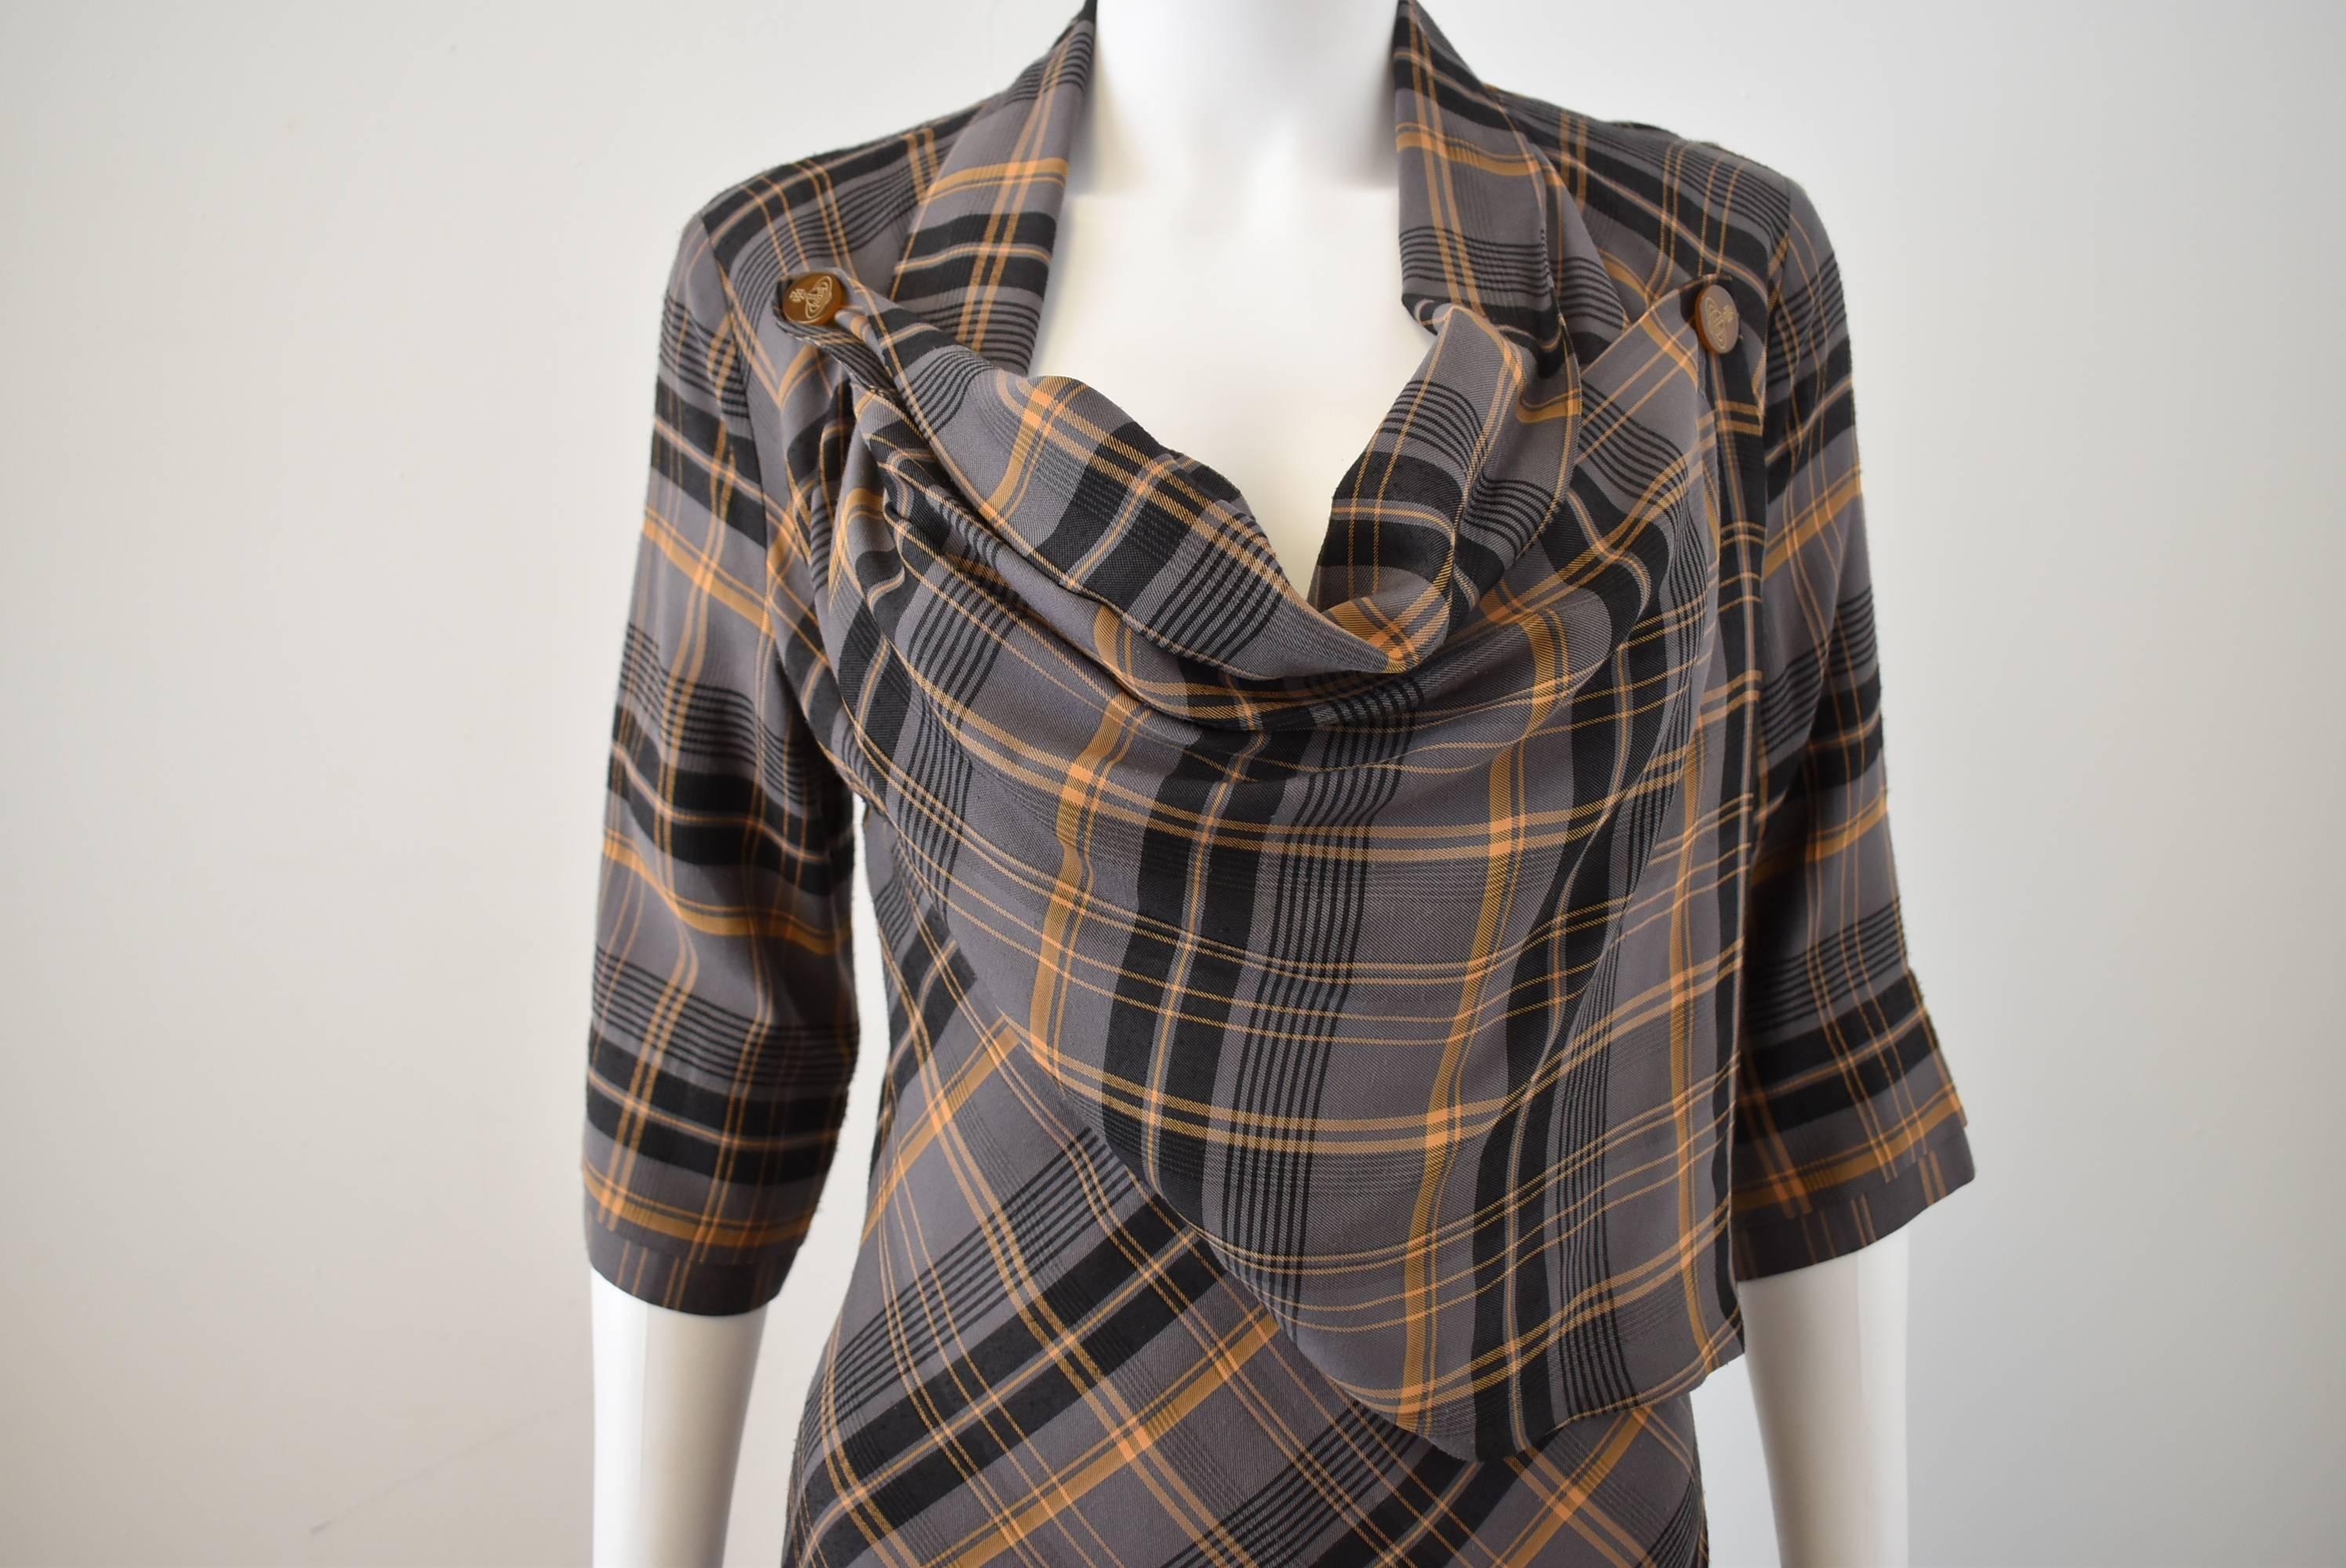 Vivienne Westwood Red Label Grey Tartan Check Dress with Cowl Neck Bib Front For Sale 2